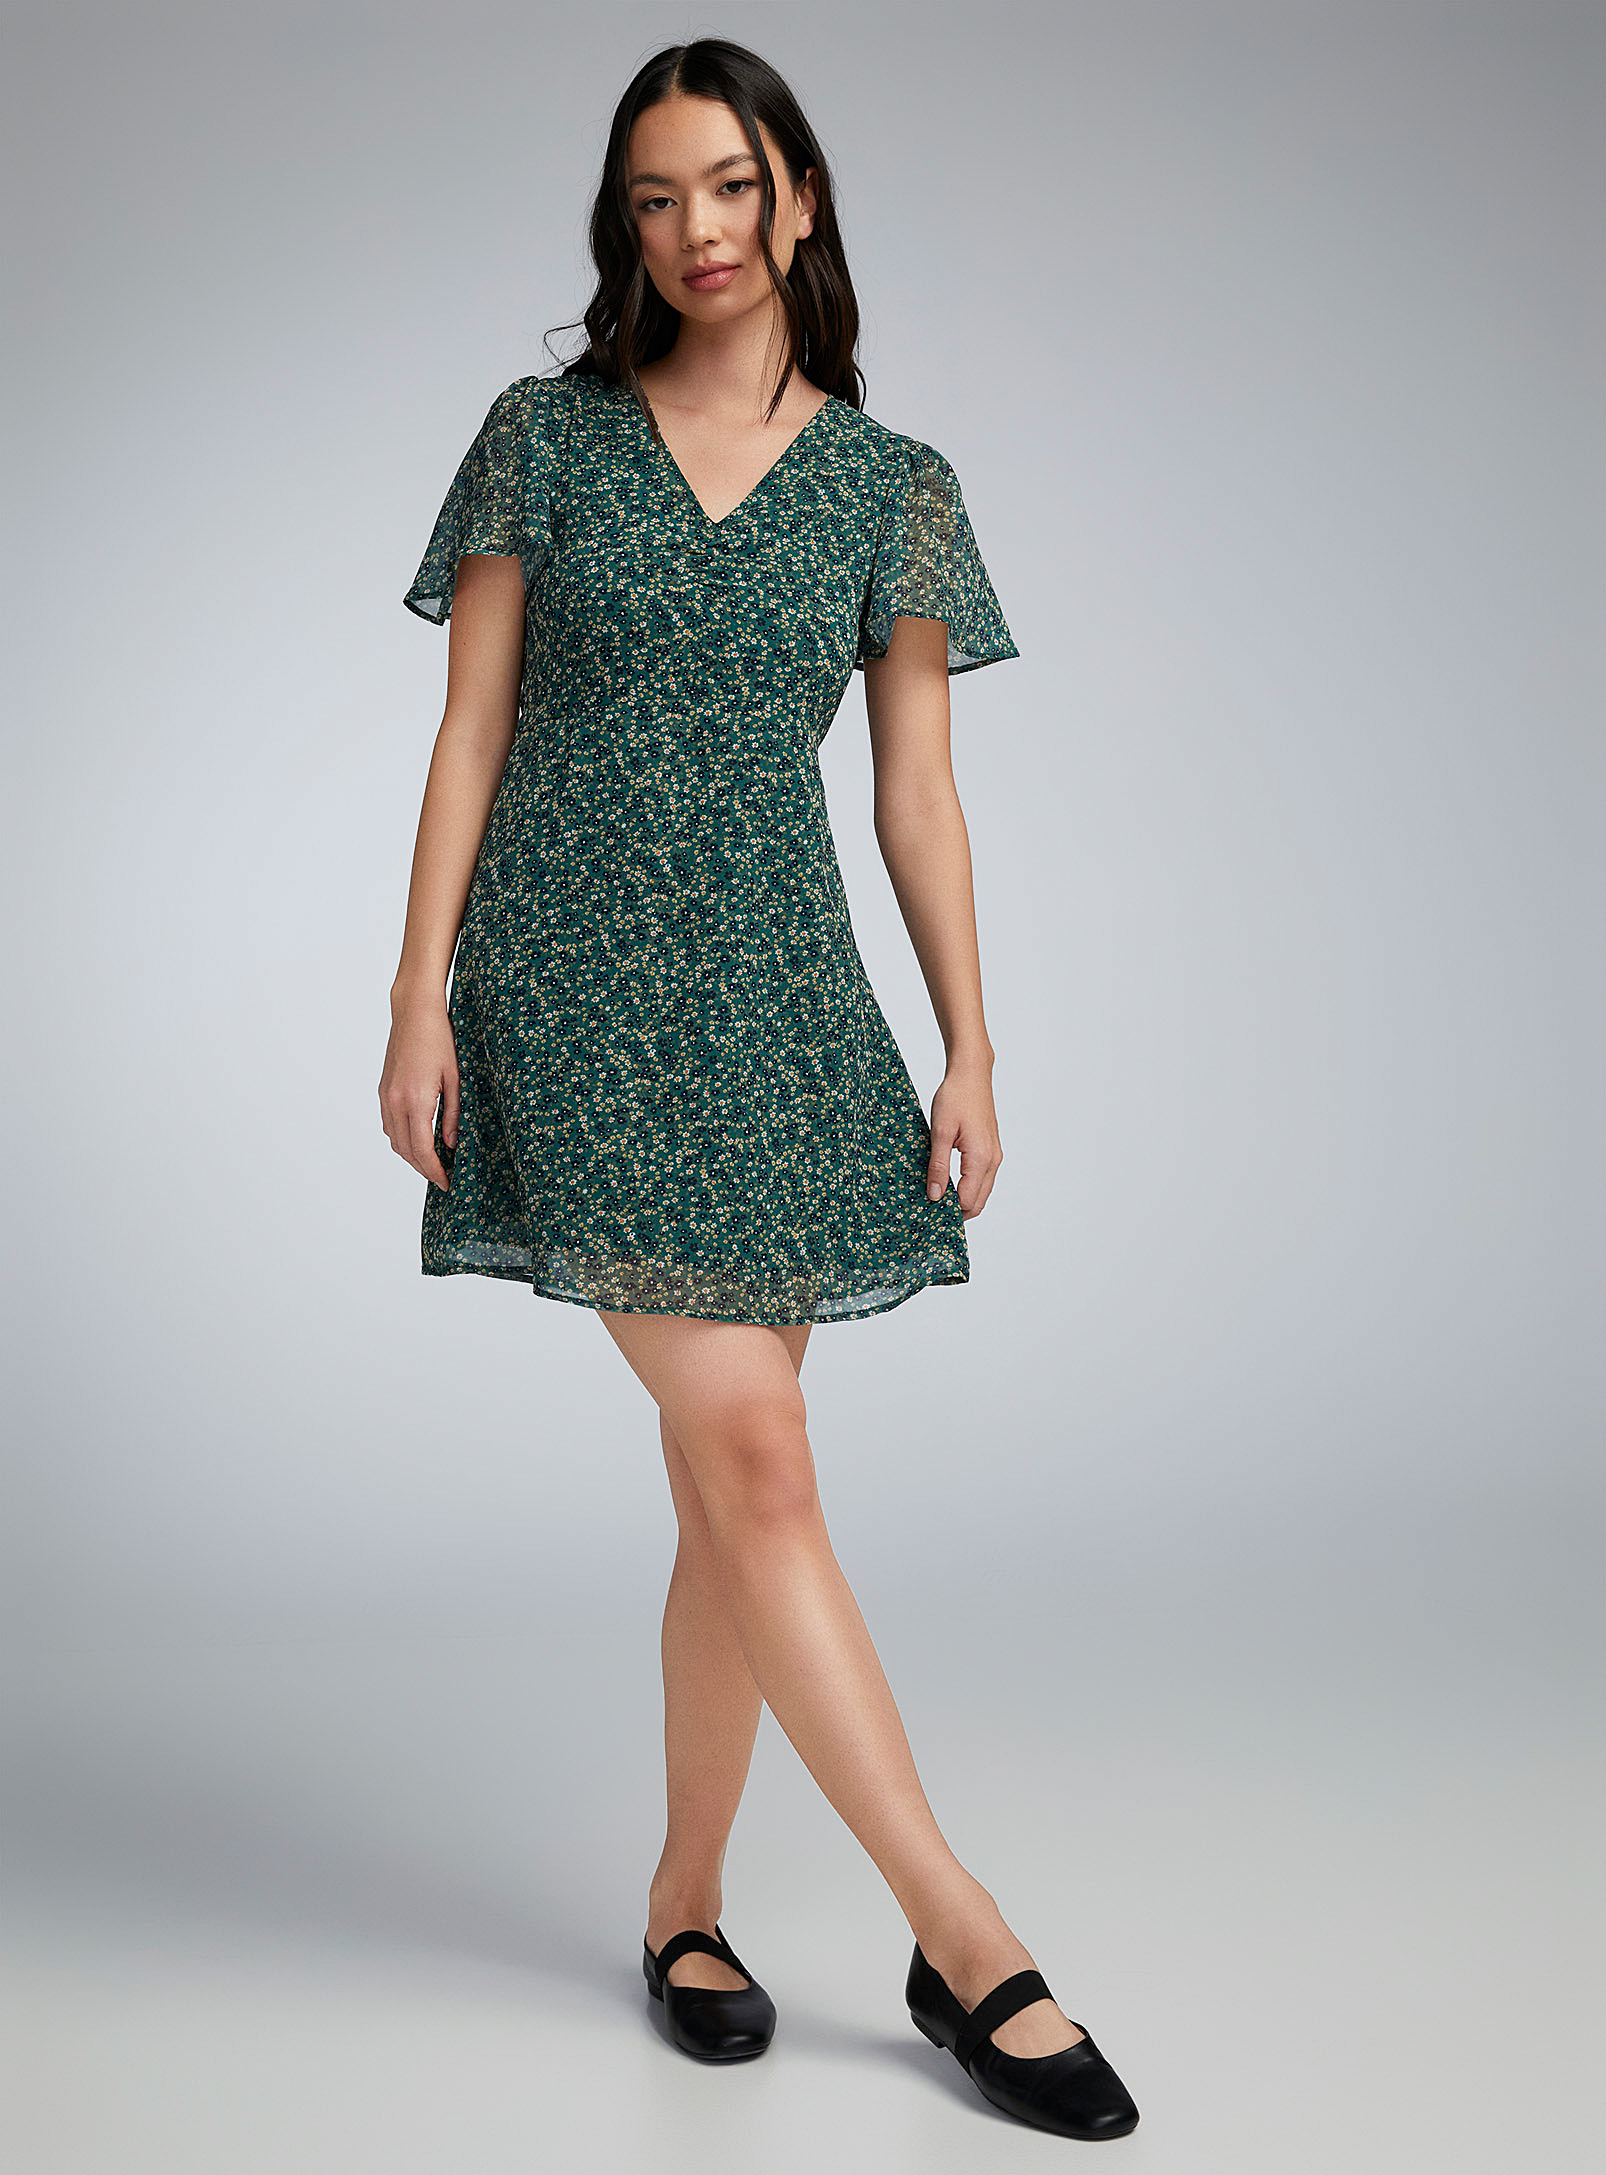 Twik Ruched Chiffon V-neck Dress In Patterned Green